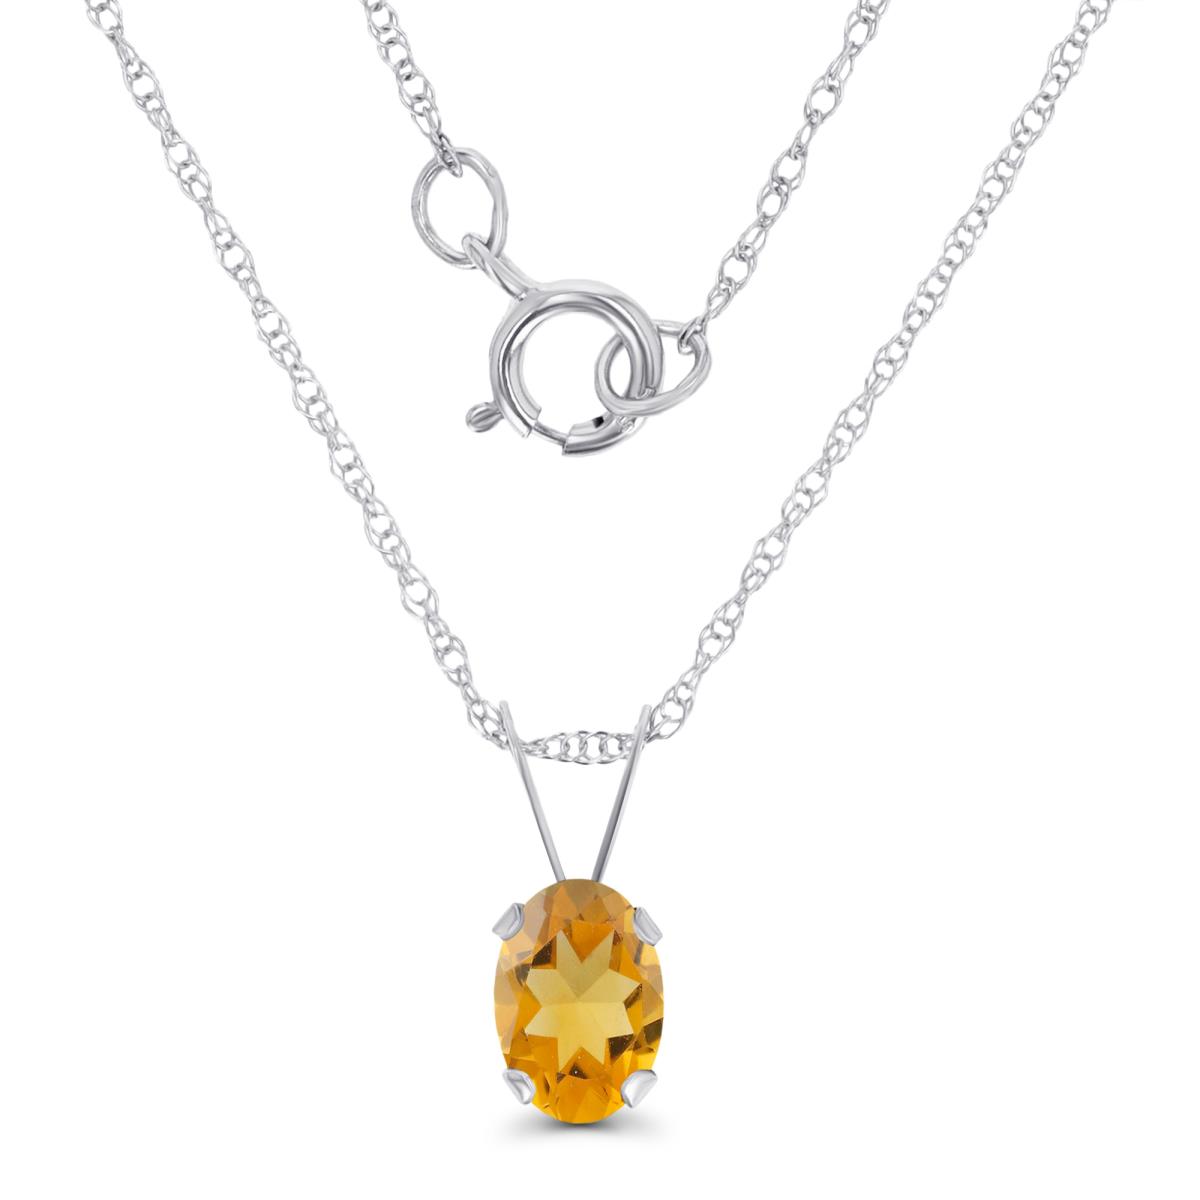 10K White Gold 6x4mm Oval Citrine 18" Rope Chain Necklace